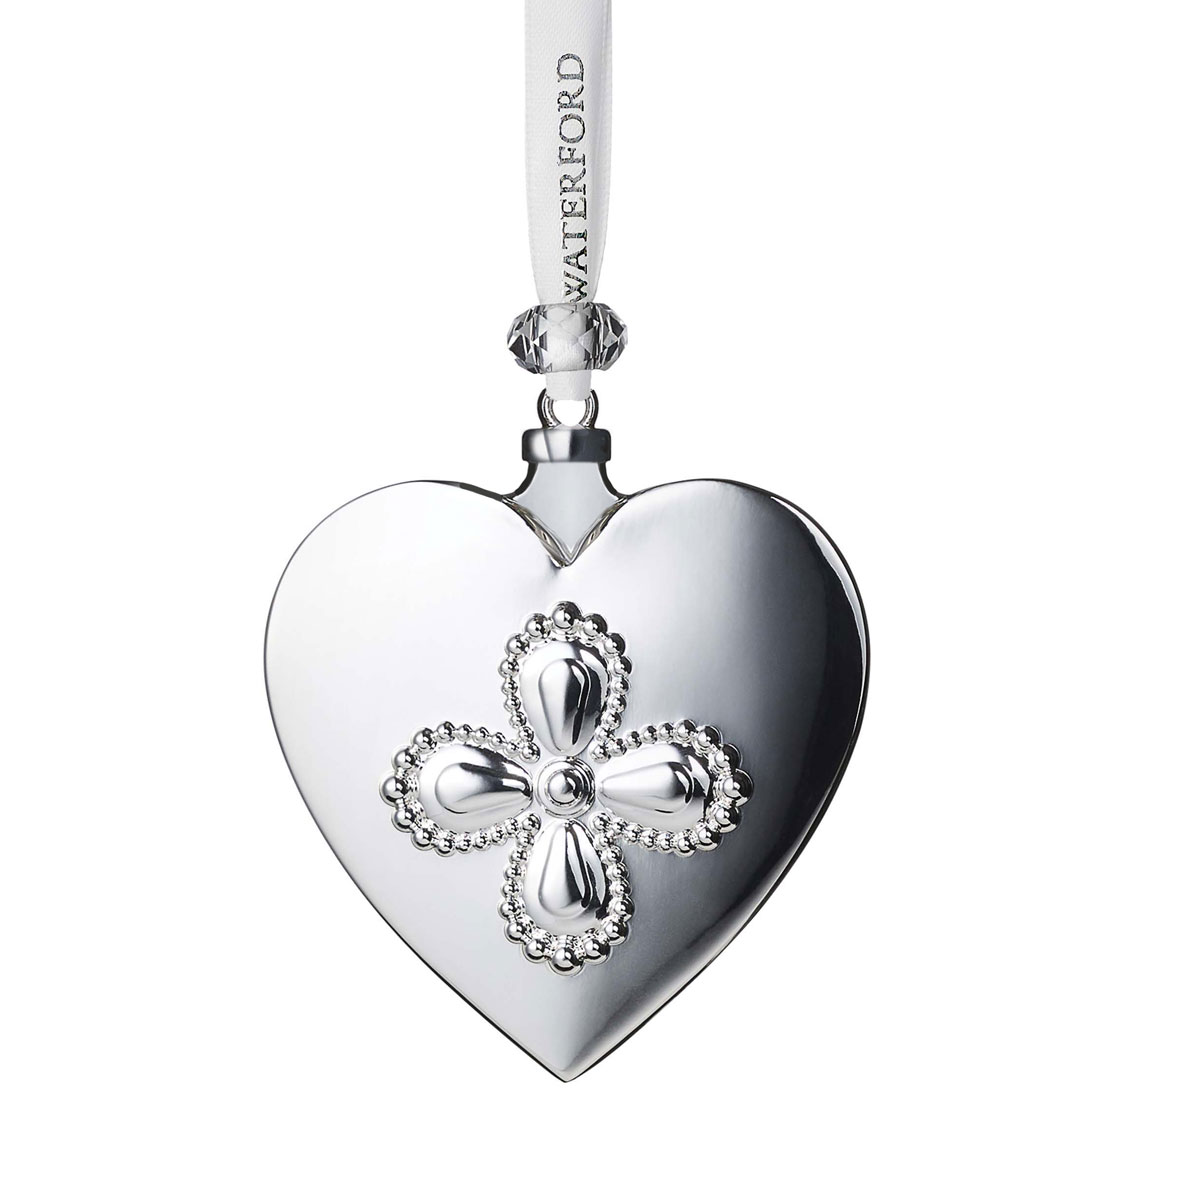 Waterford Silver Heart Ornament